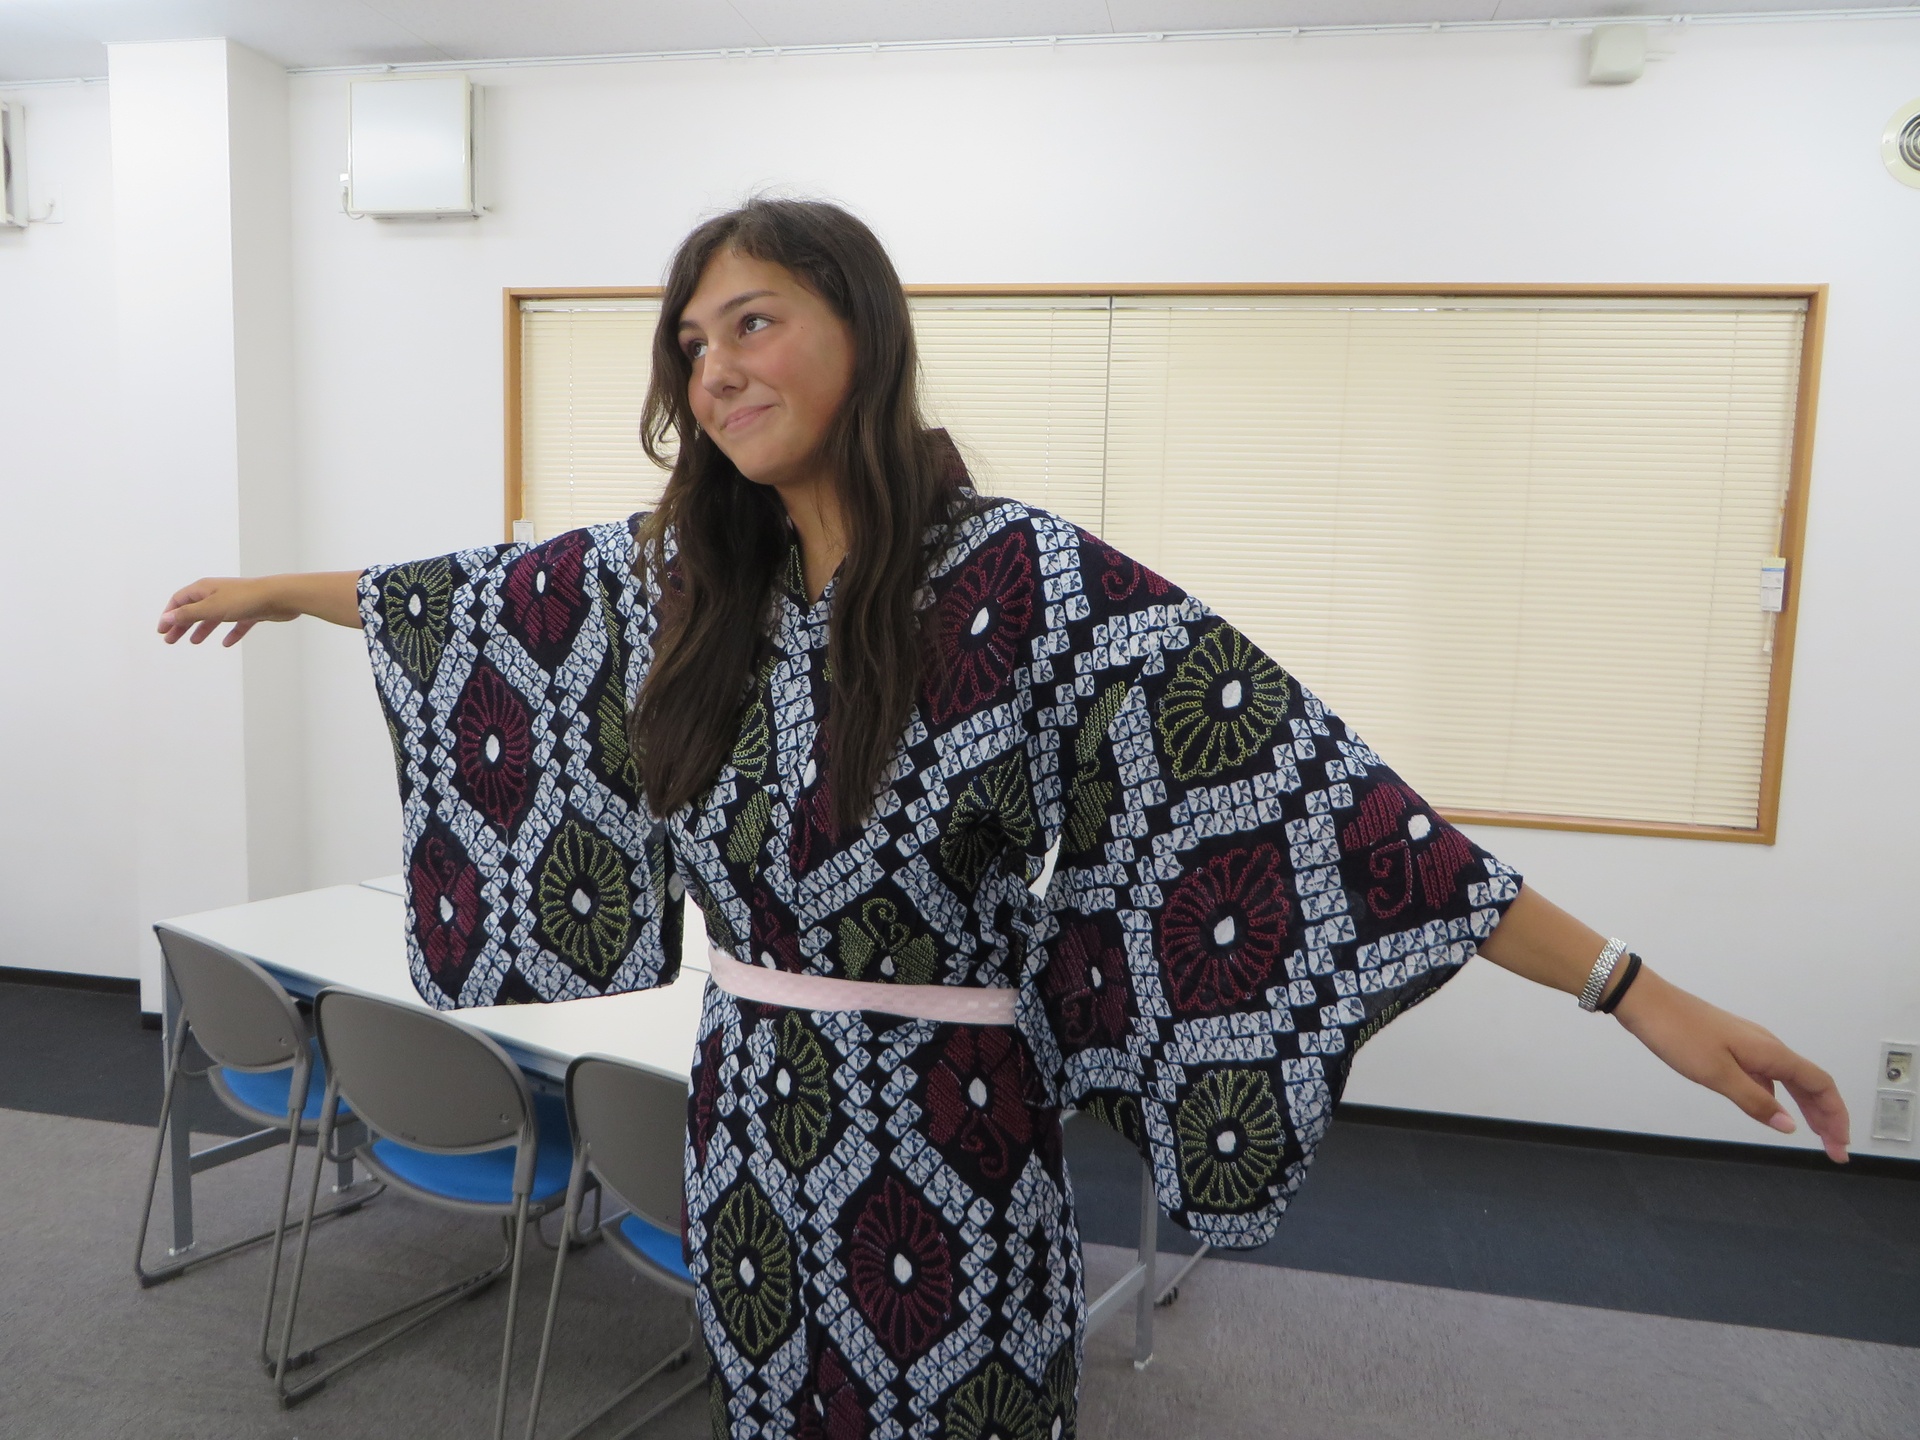 Student trying on kimono in classroom